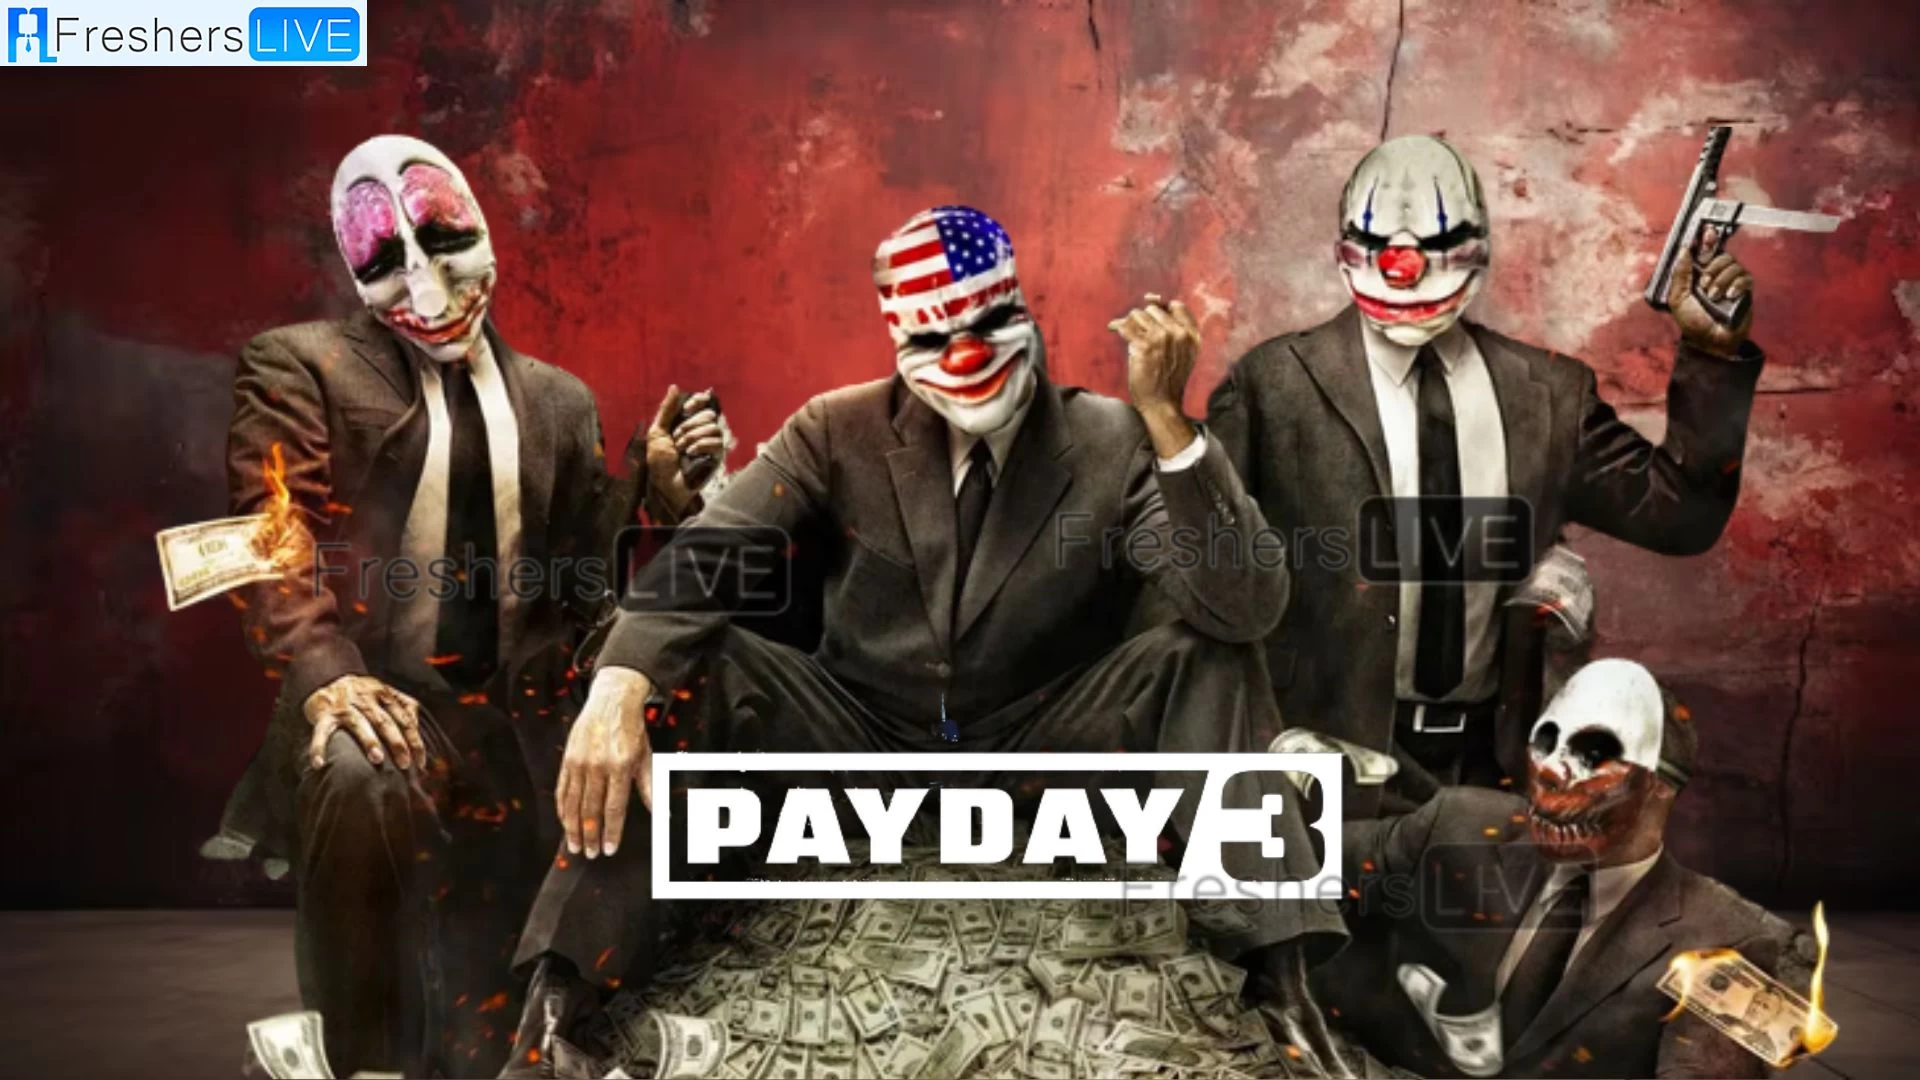 Payday 3 Executive Deposit Box, How to Find the Executives Deposit Box in Payday 3?